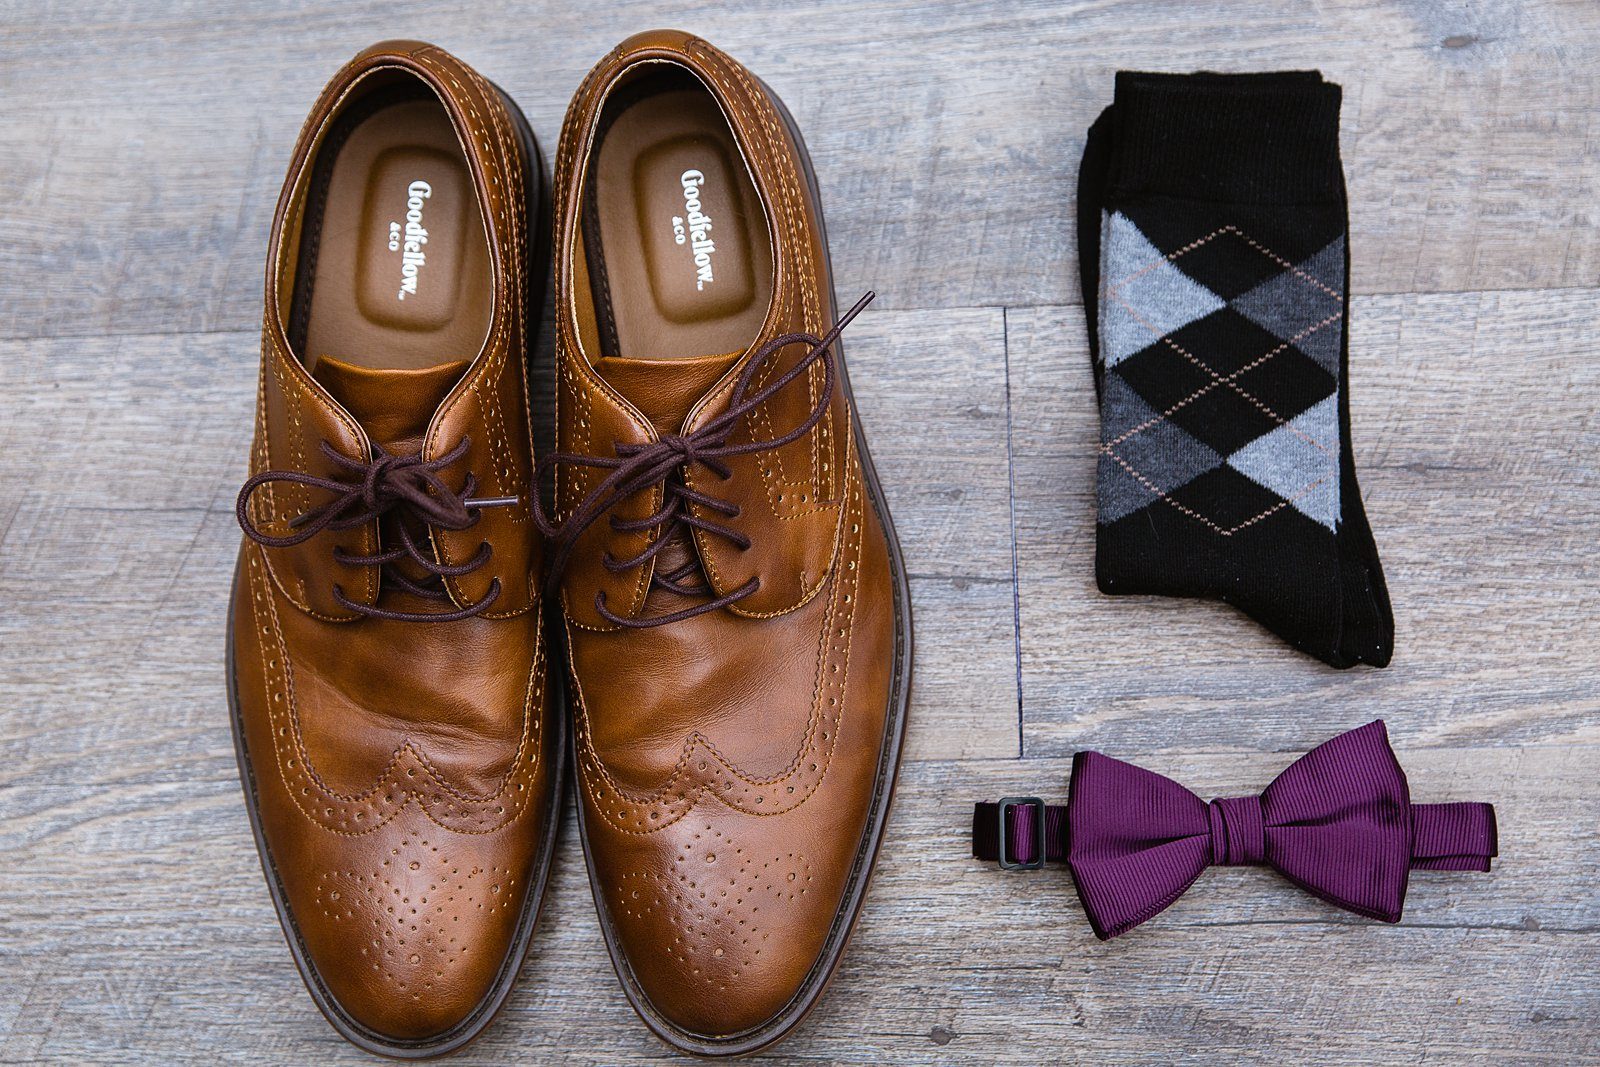 Groom's wedding details of brown oxfords, argyle socks, and a purple bow tie by PMA Photography.